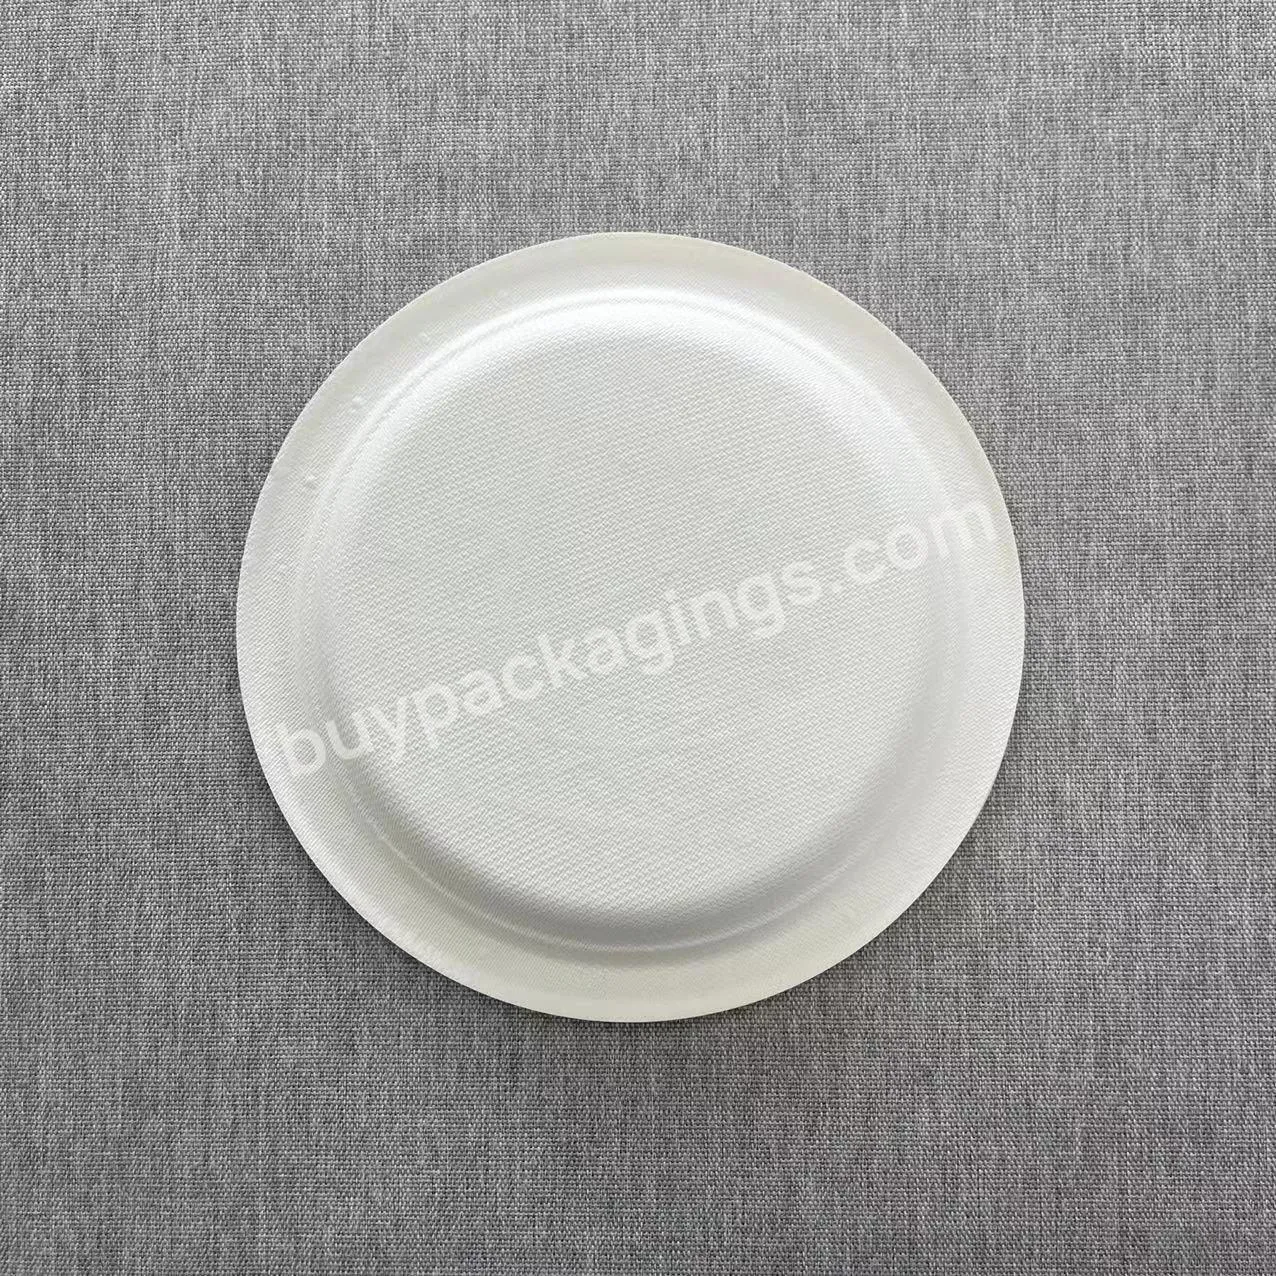 100% Compostable Disposable Thanksgiving Sugarcane Paper Food Plates 10 Inch White Bagasse Pulp Plate - Buy Disposable Sugarcane Pulp Plate,Paper Plates Thanksgiving,10inch Paper Plate.